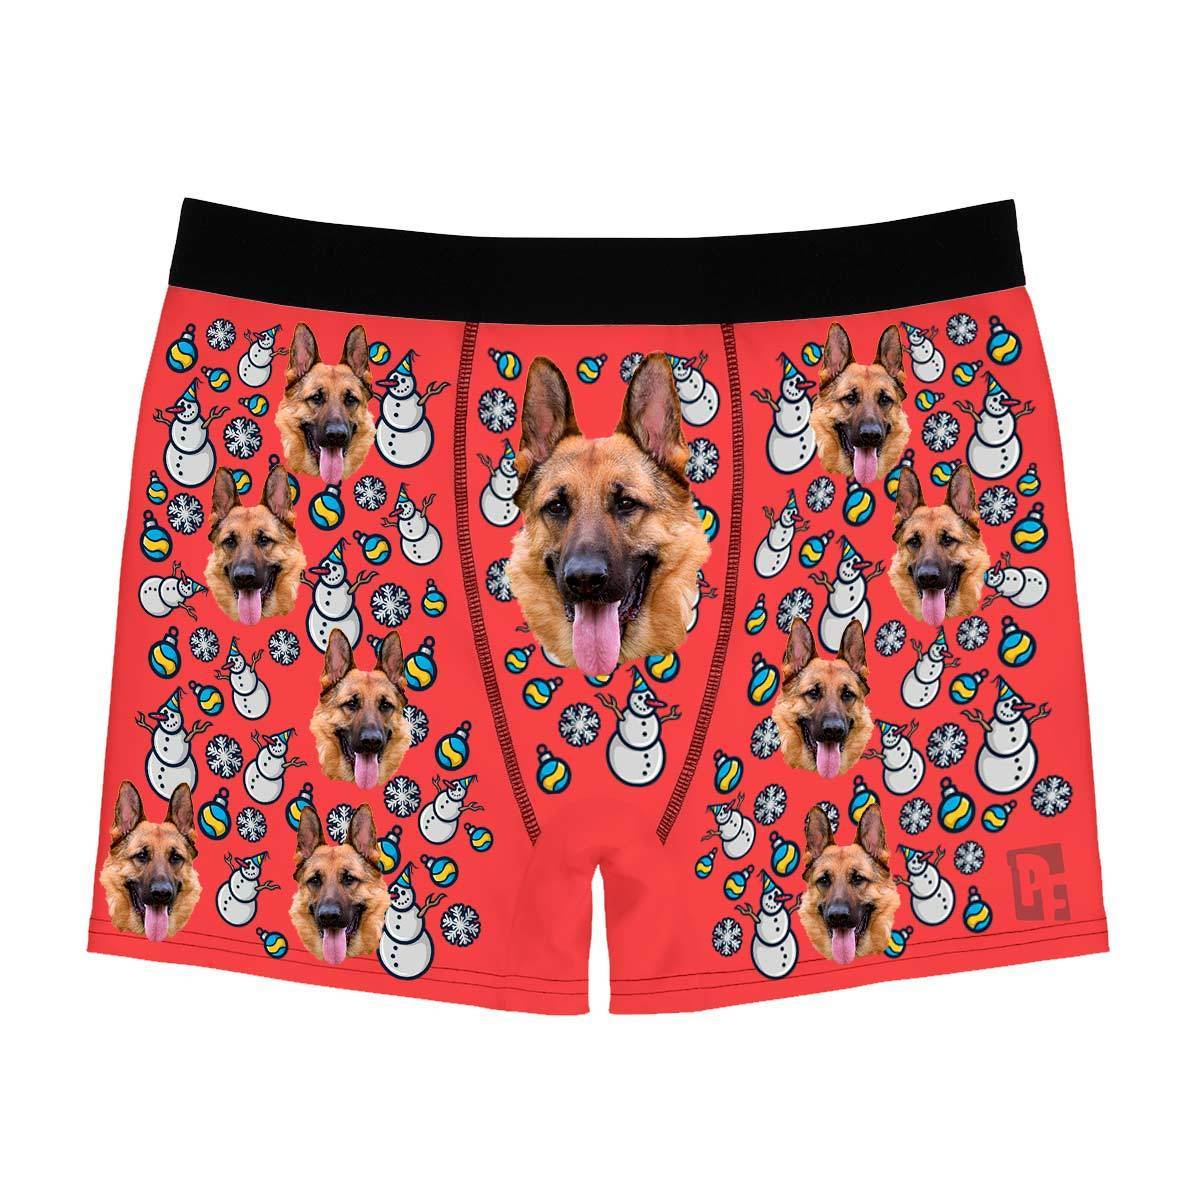 Red Snowman men's boxer briefs personalized with photo printed on them